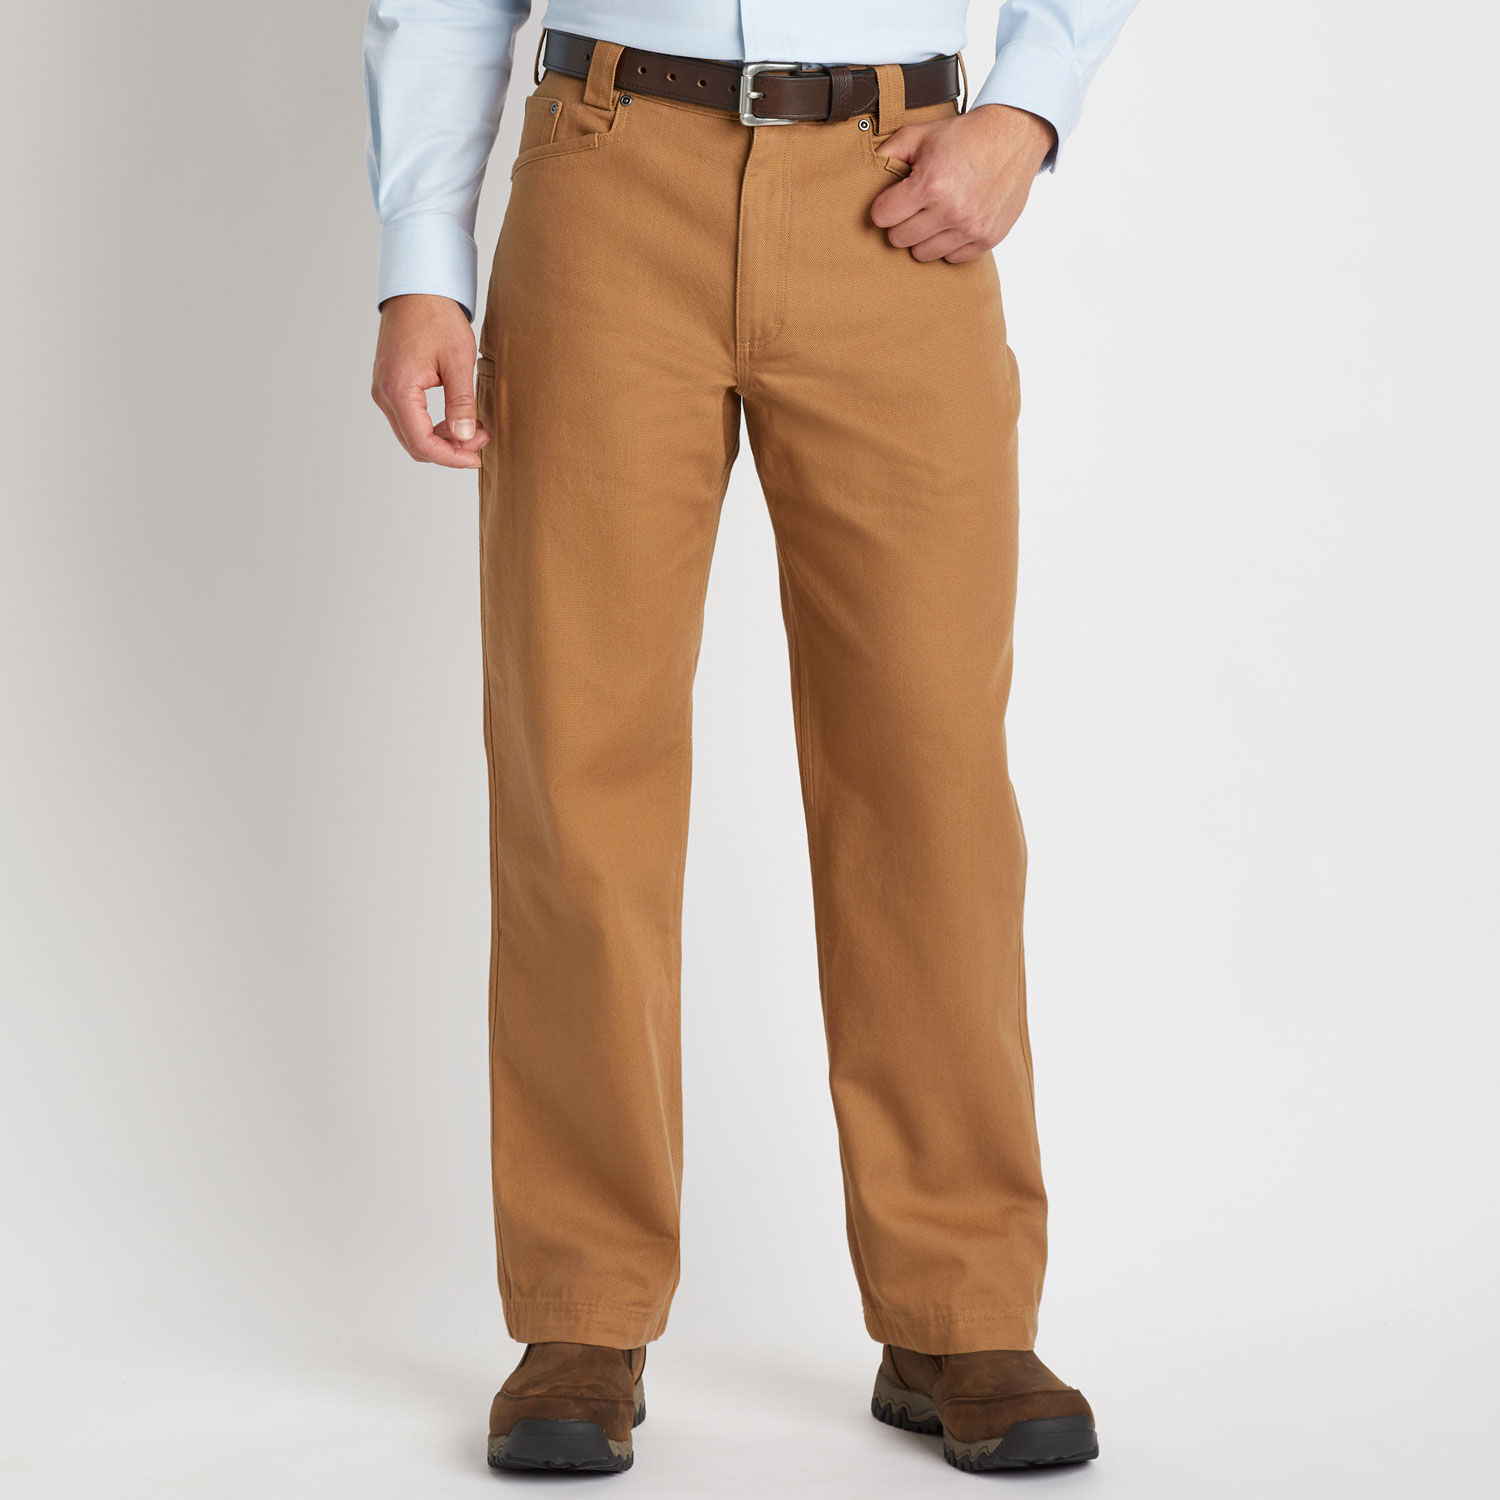 Men's Fire Hose Relaxed Fit 5-Pocket Pants